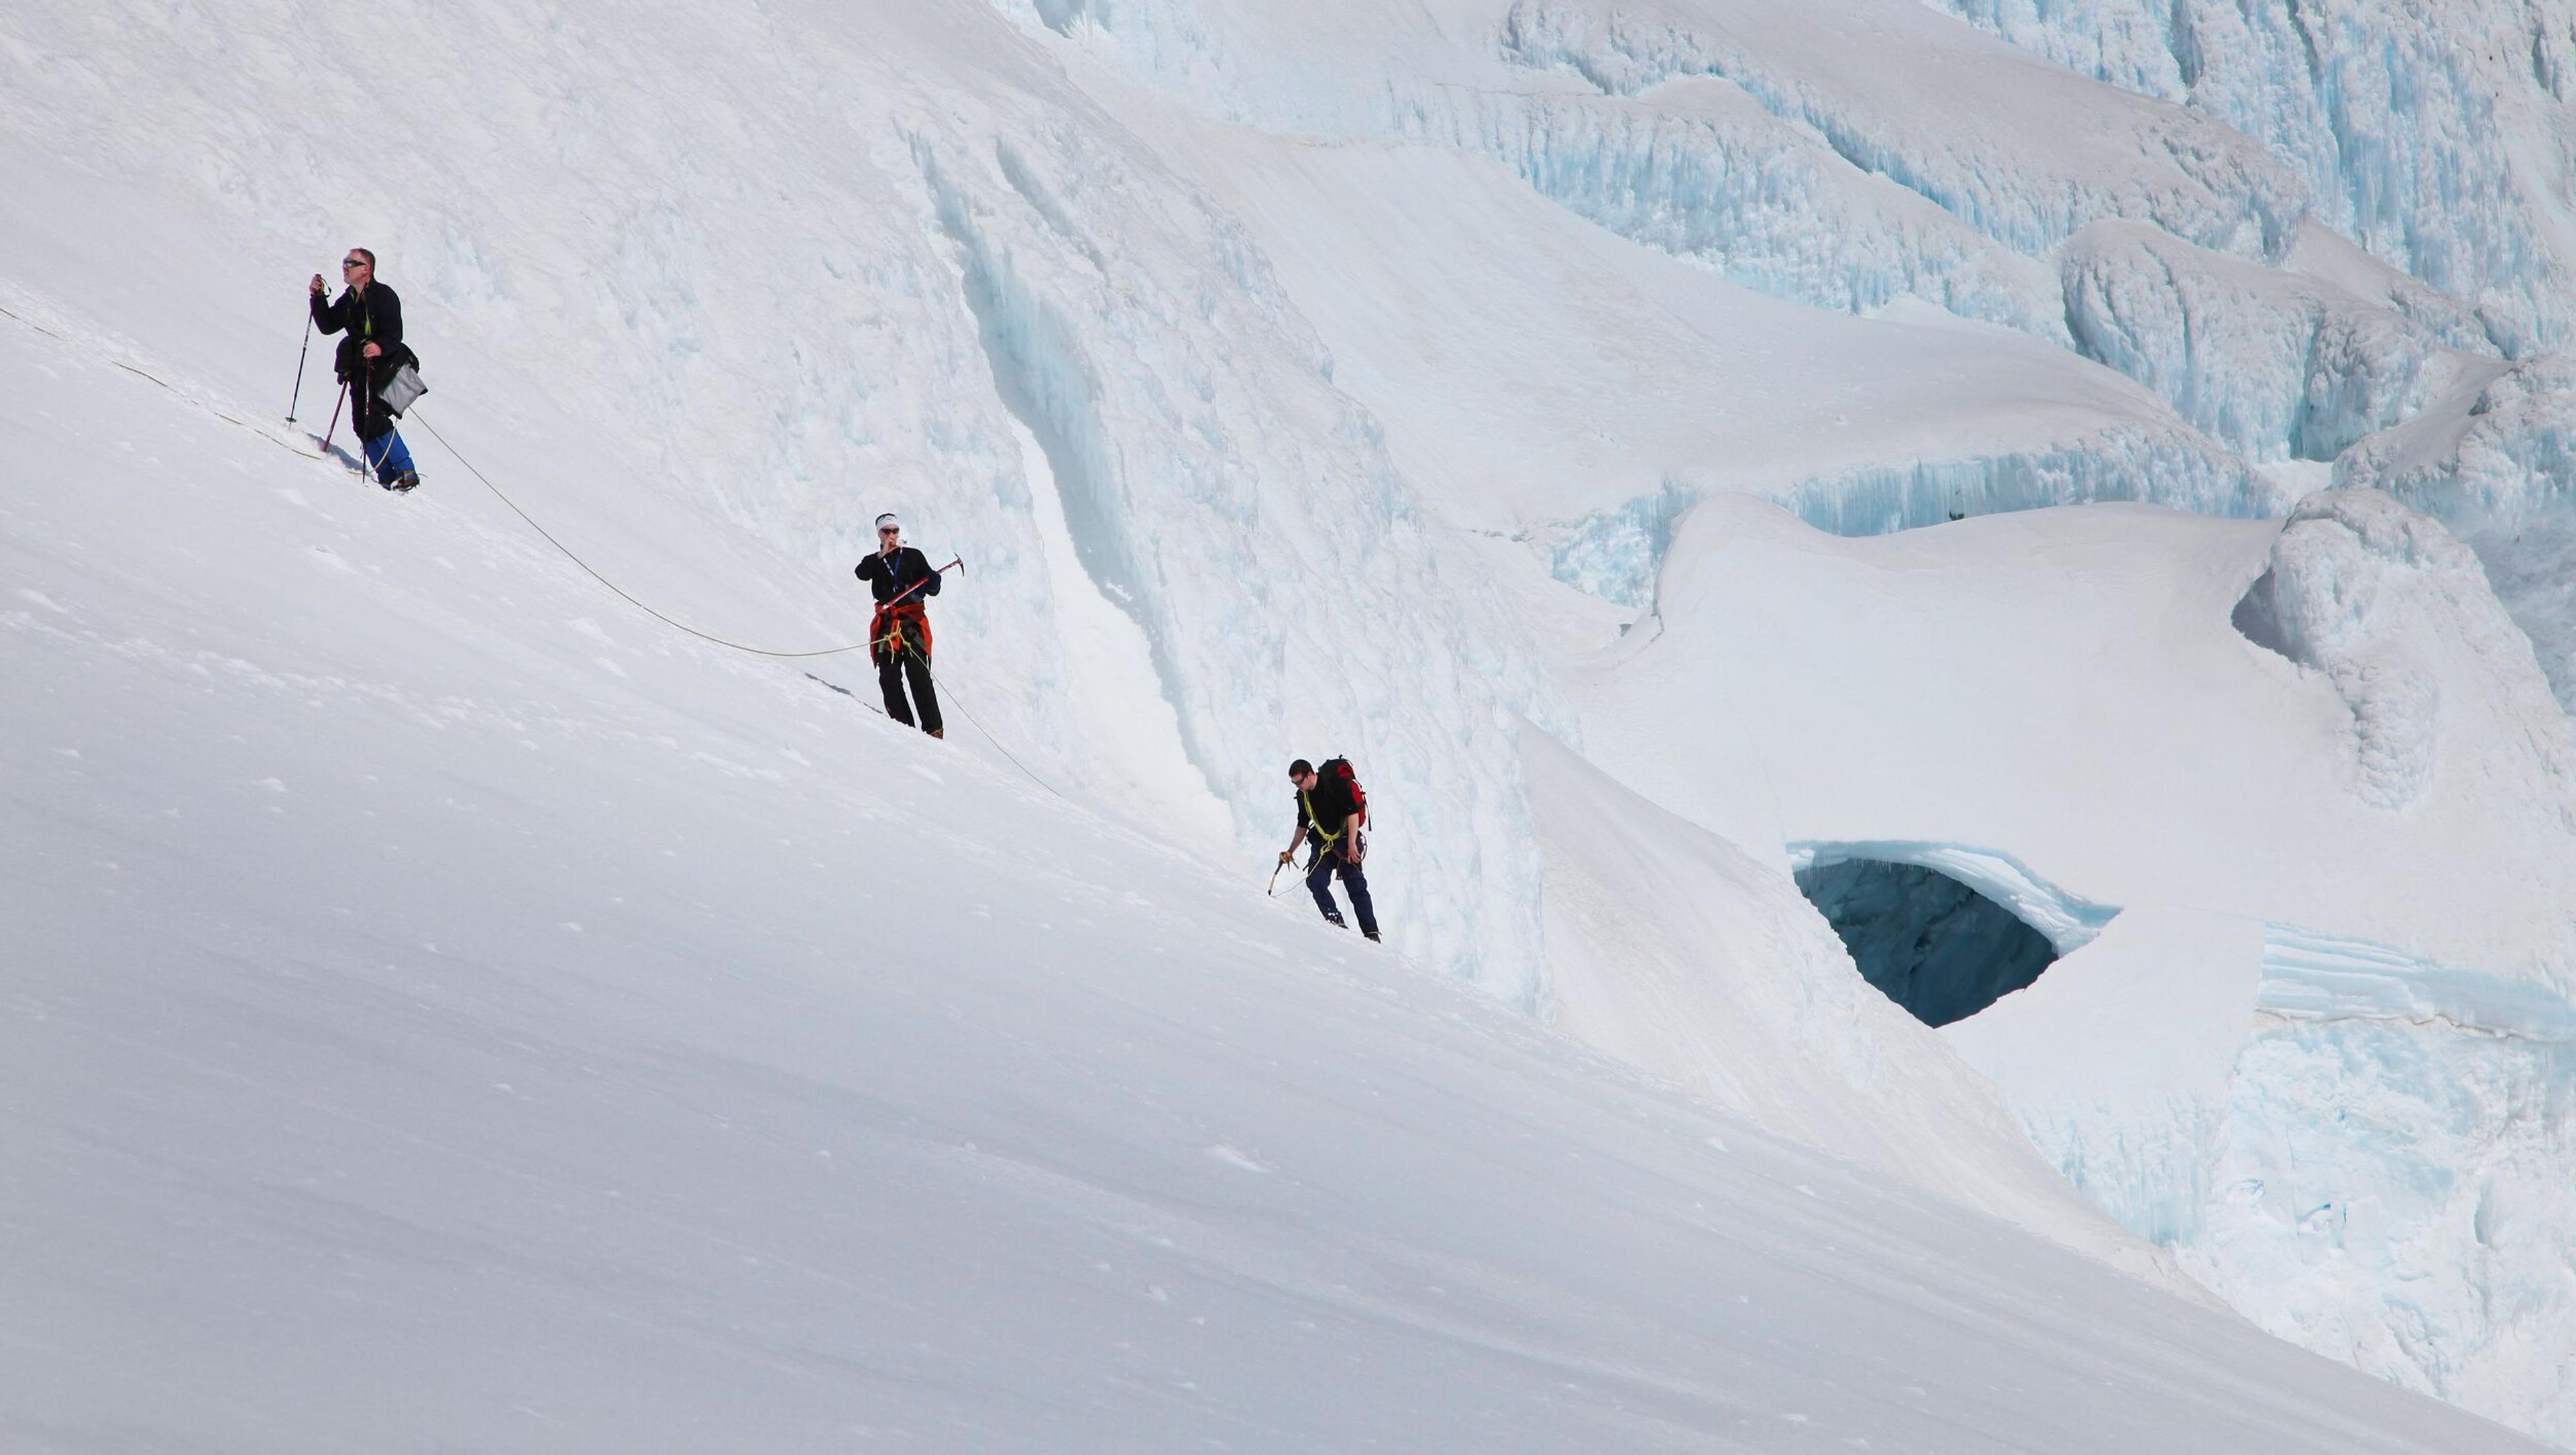 Group of climbers ascending Hvannadalsnjúkur with deep glacial crevasses visible in the background.